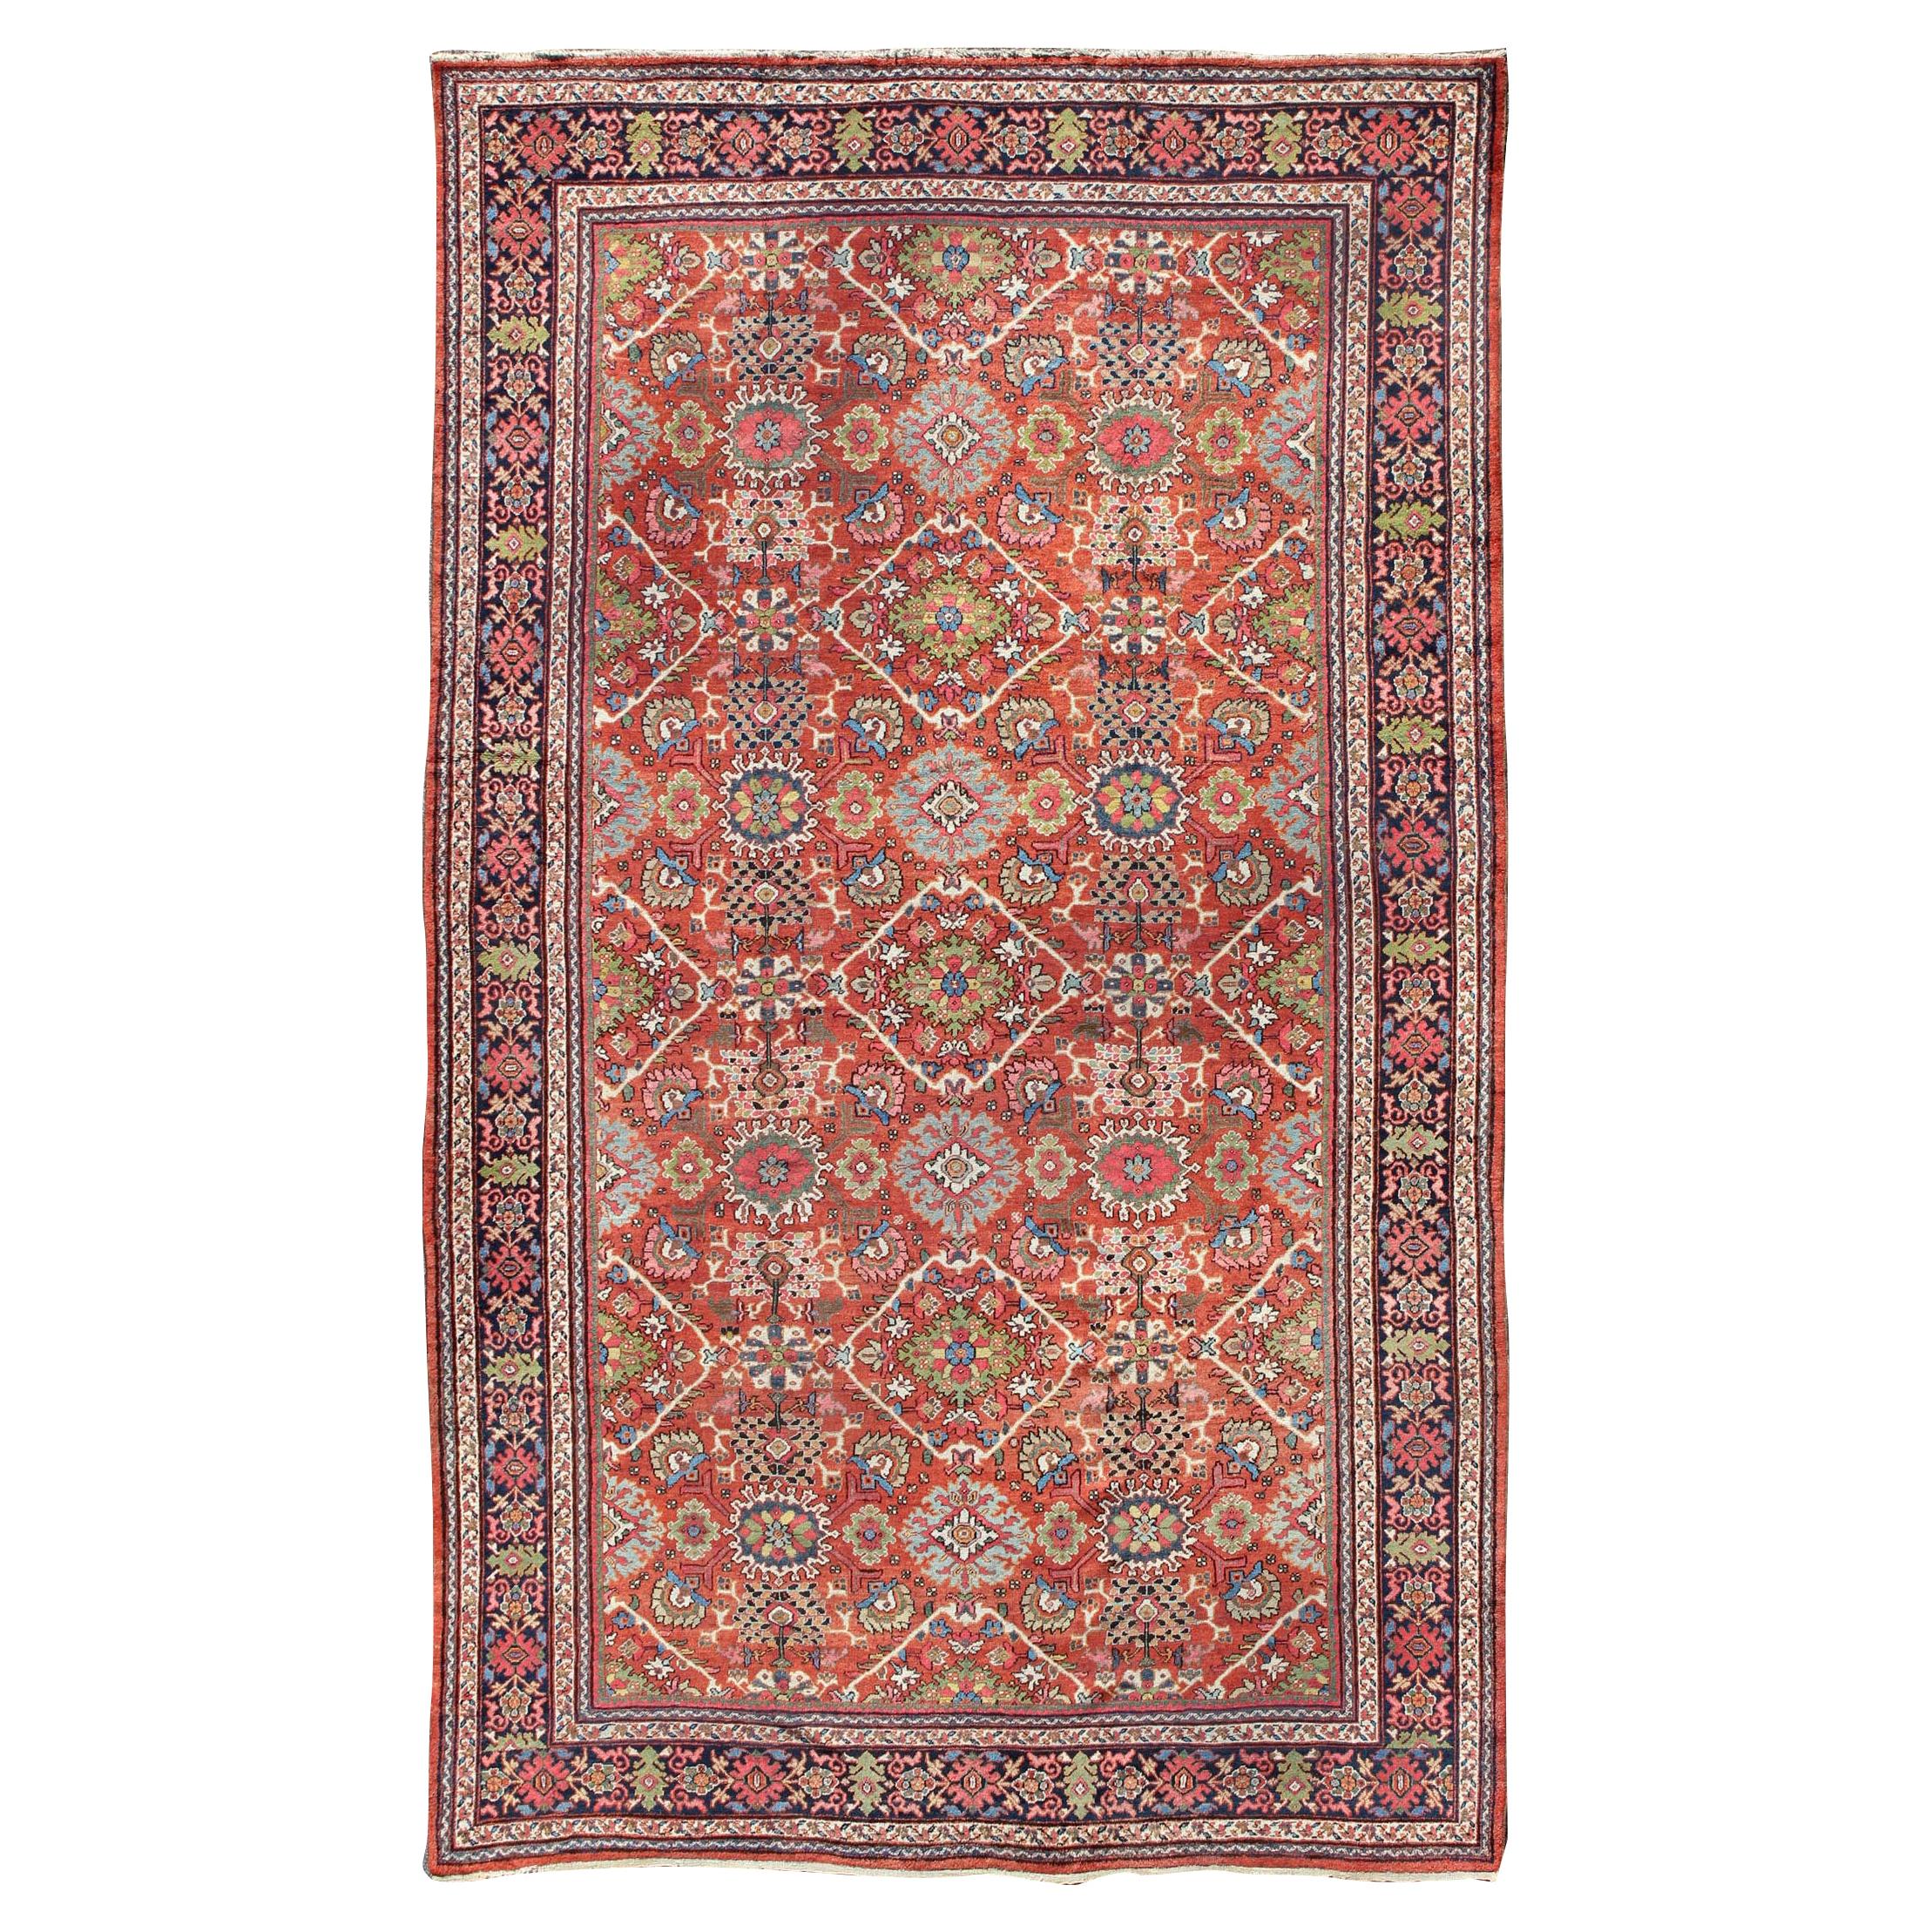 Antique Persian Sultanabad-Mahal Rug in Jewel Tones & All-Over Geometric Design For Sale